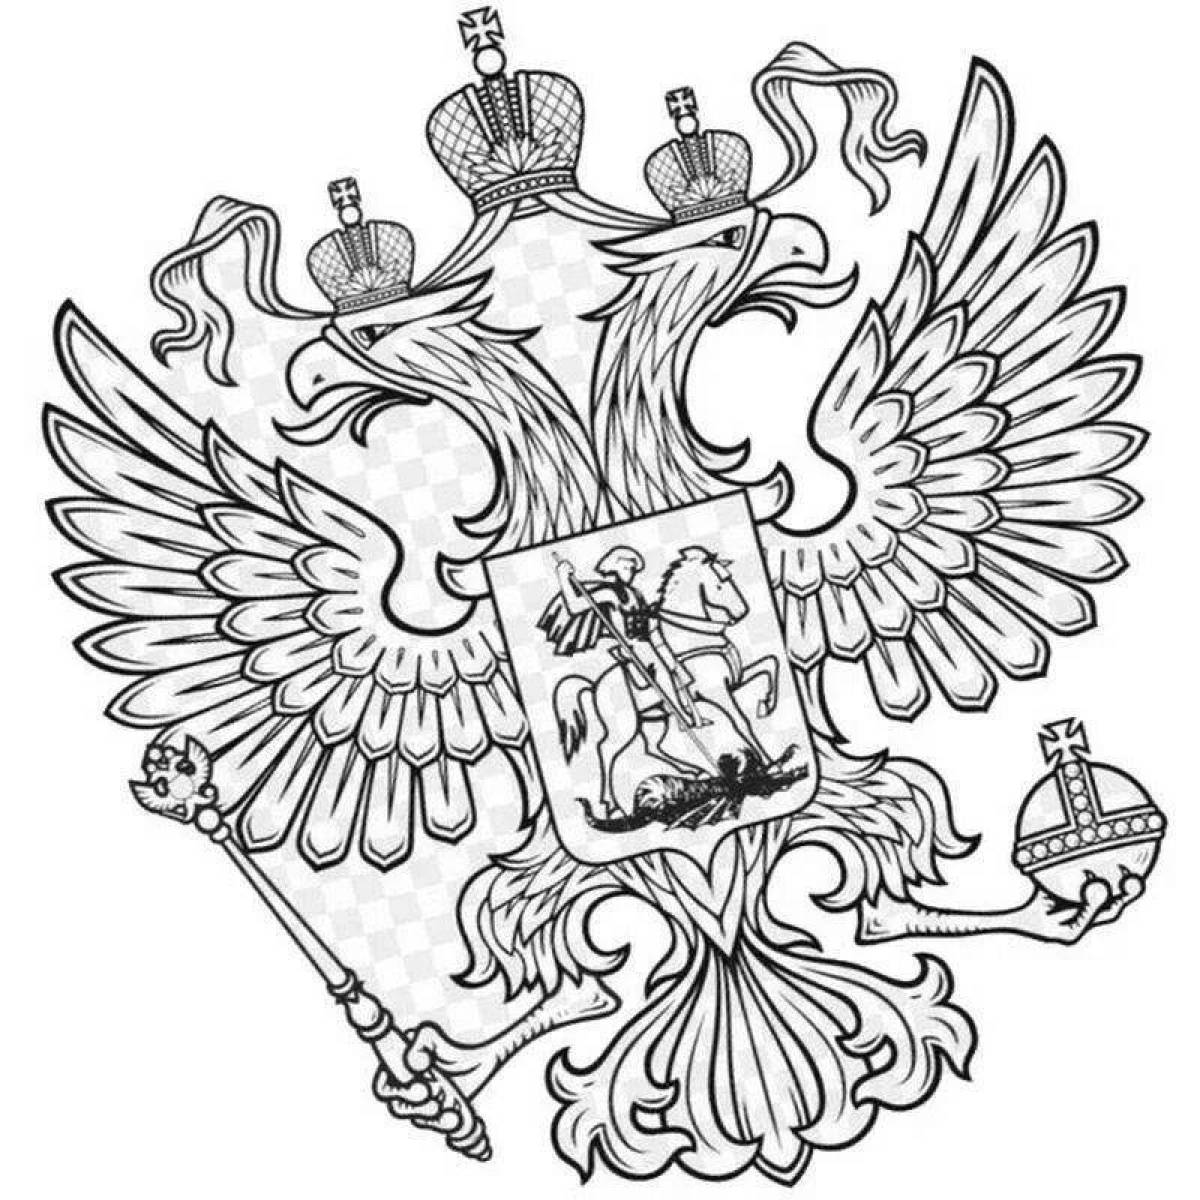 Palace coloring coat of arms of the russian federation